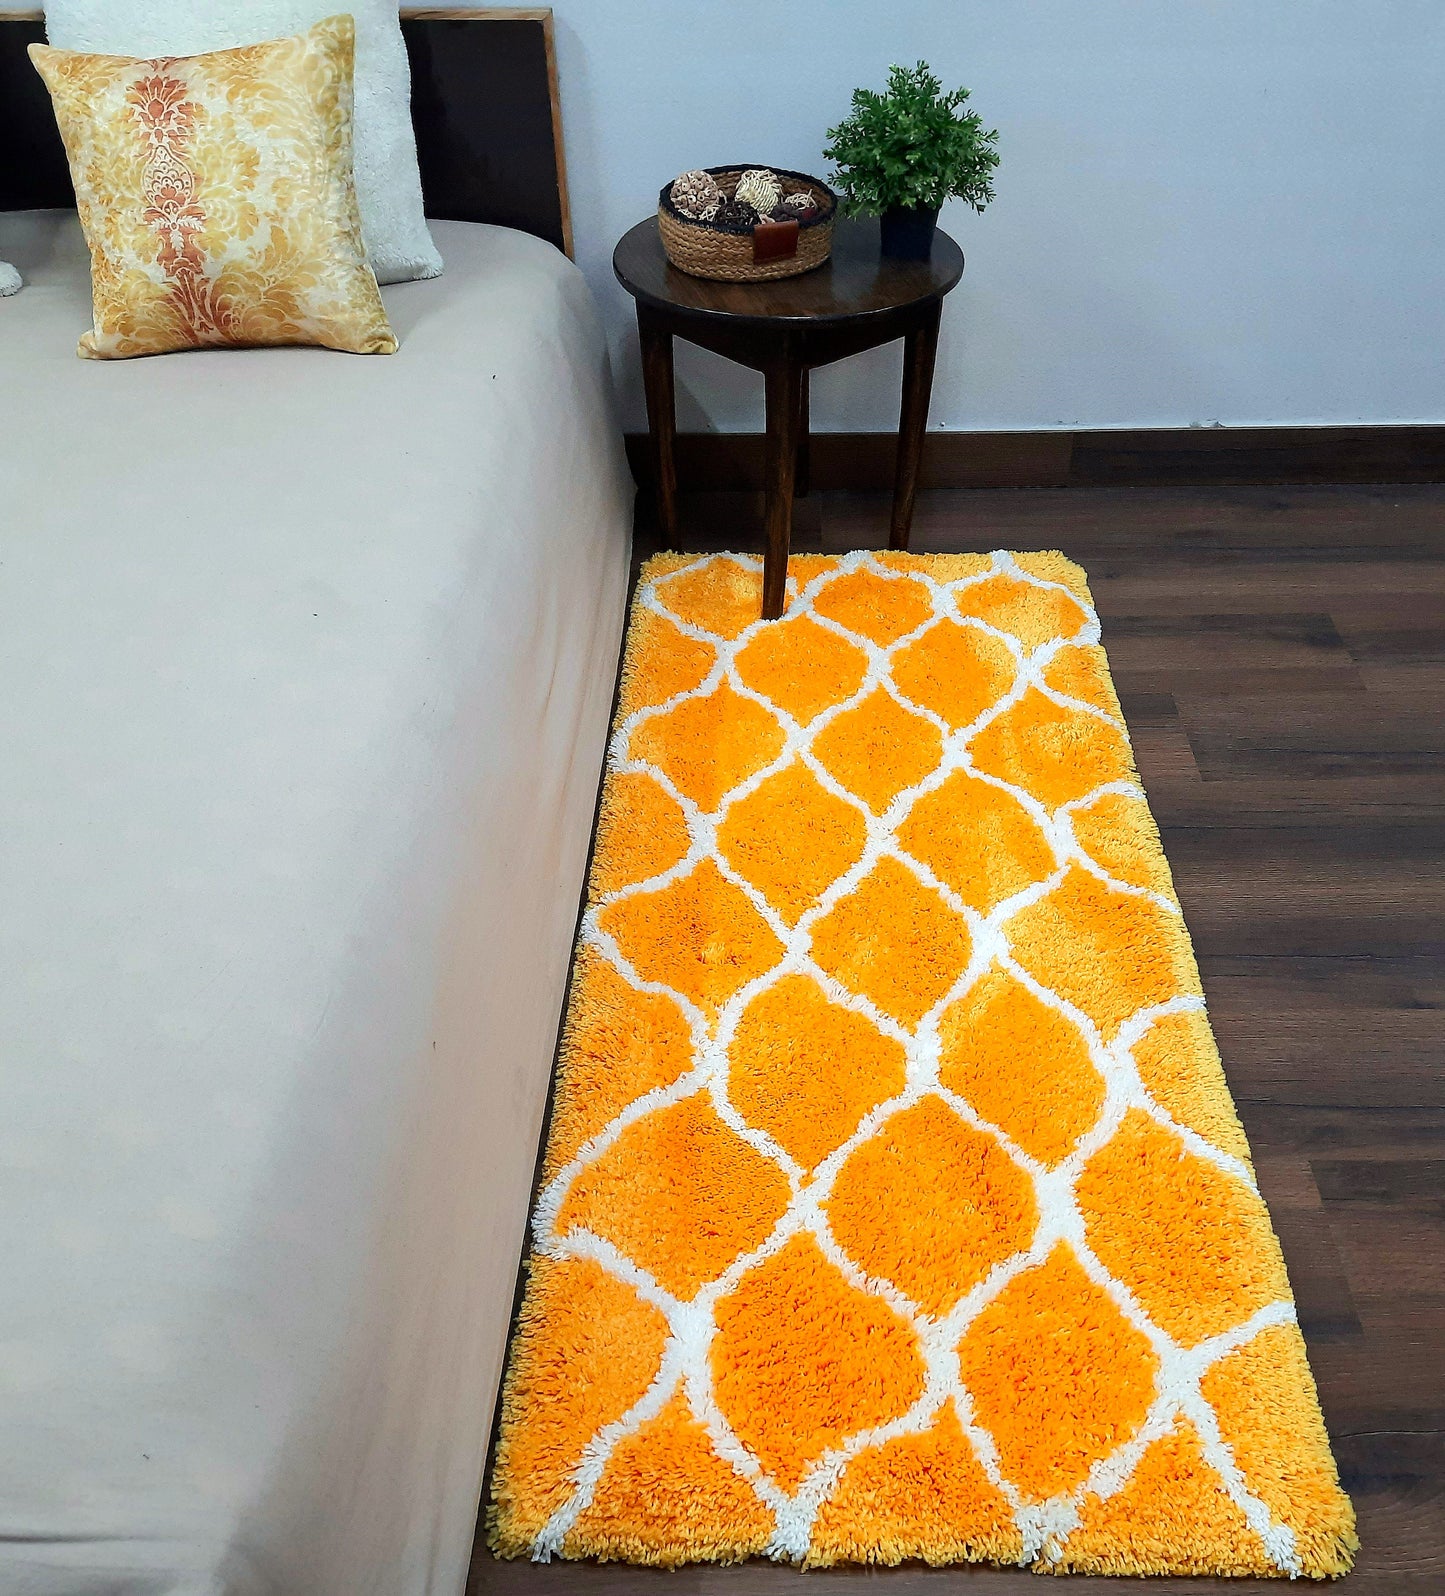 Plush Premium Shaggy Yellow Carpet With White Moroccan Design /Bedside Runners by Avioni Home